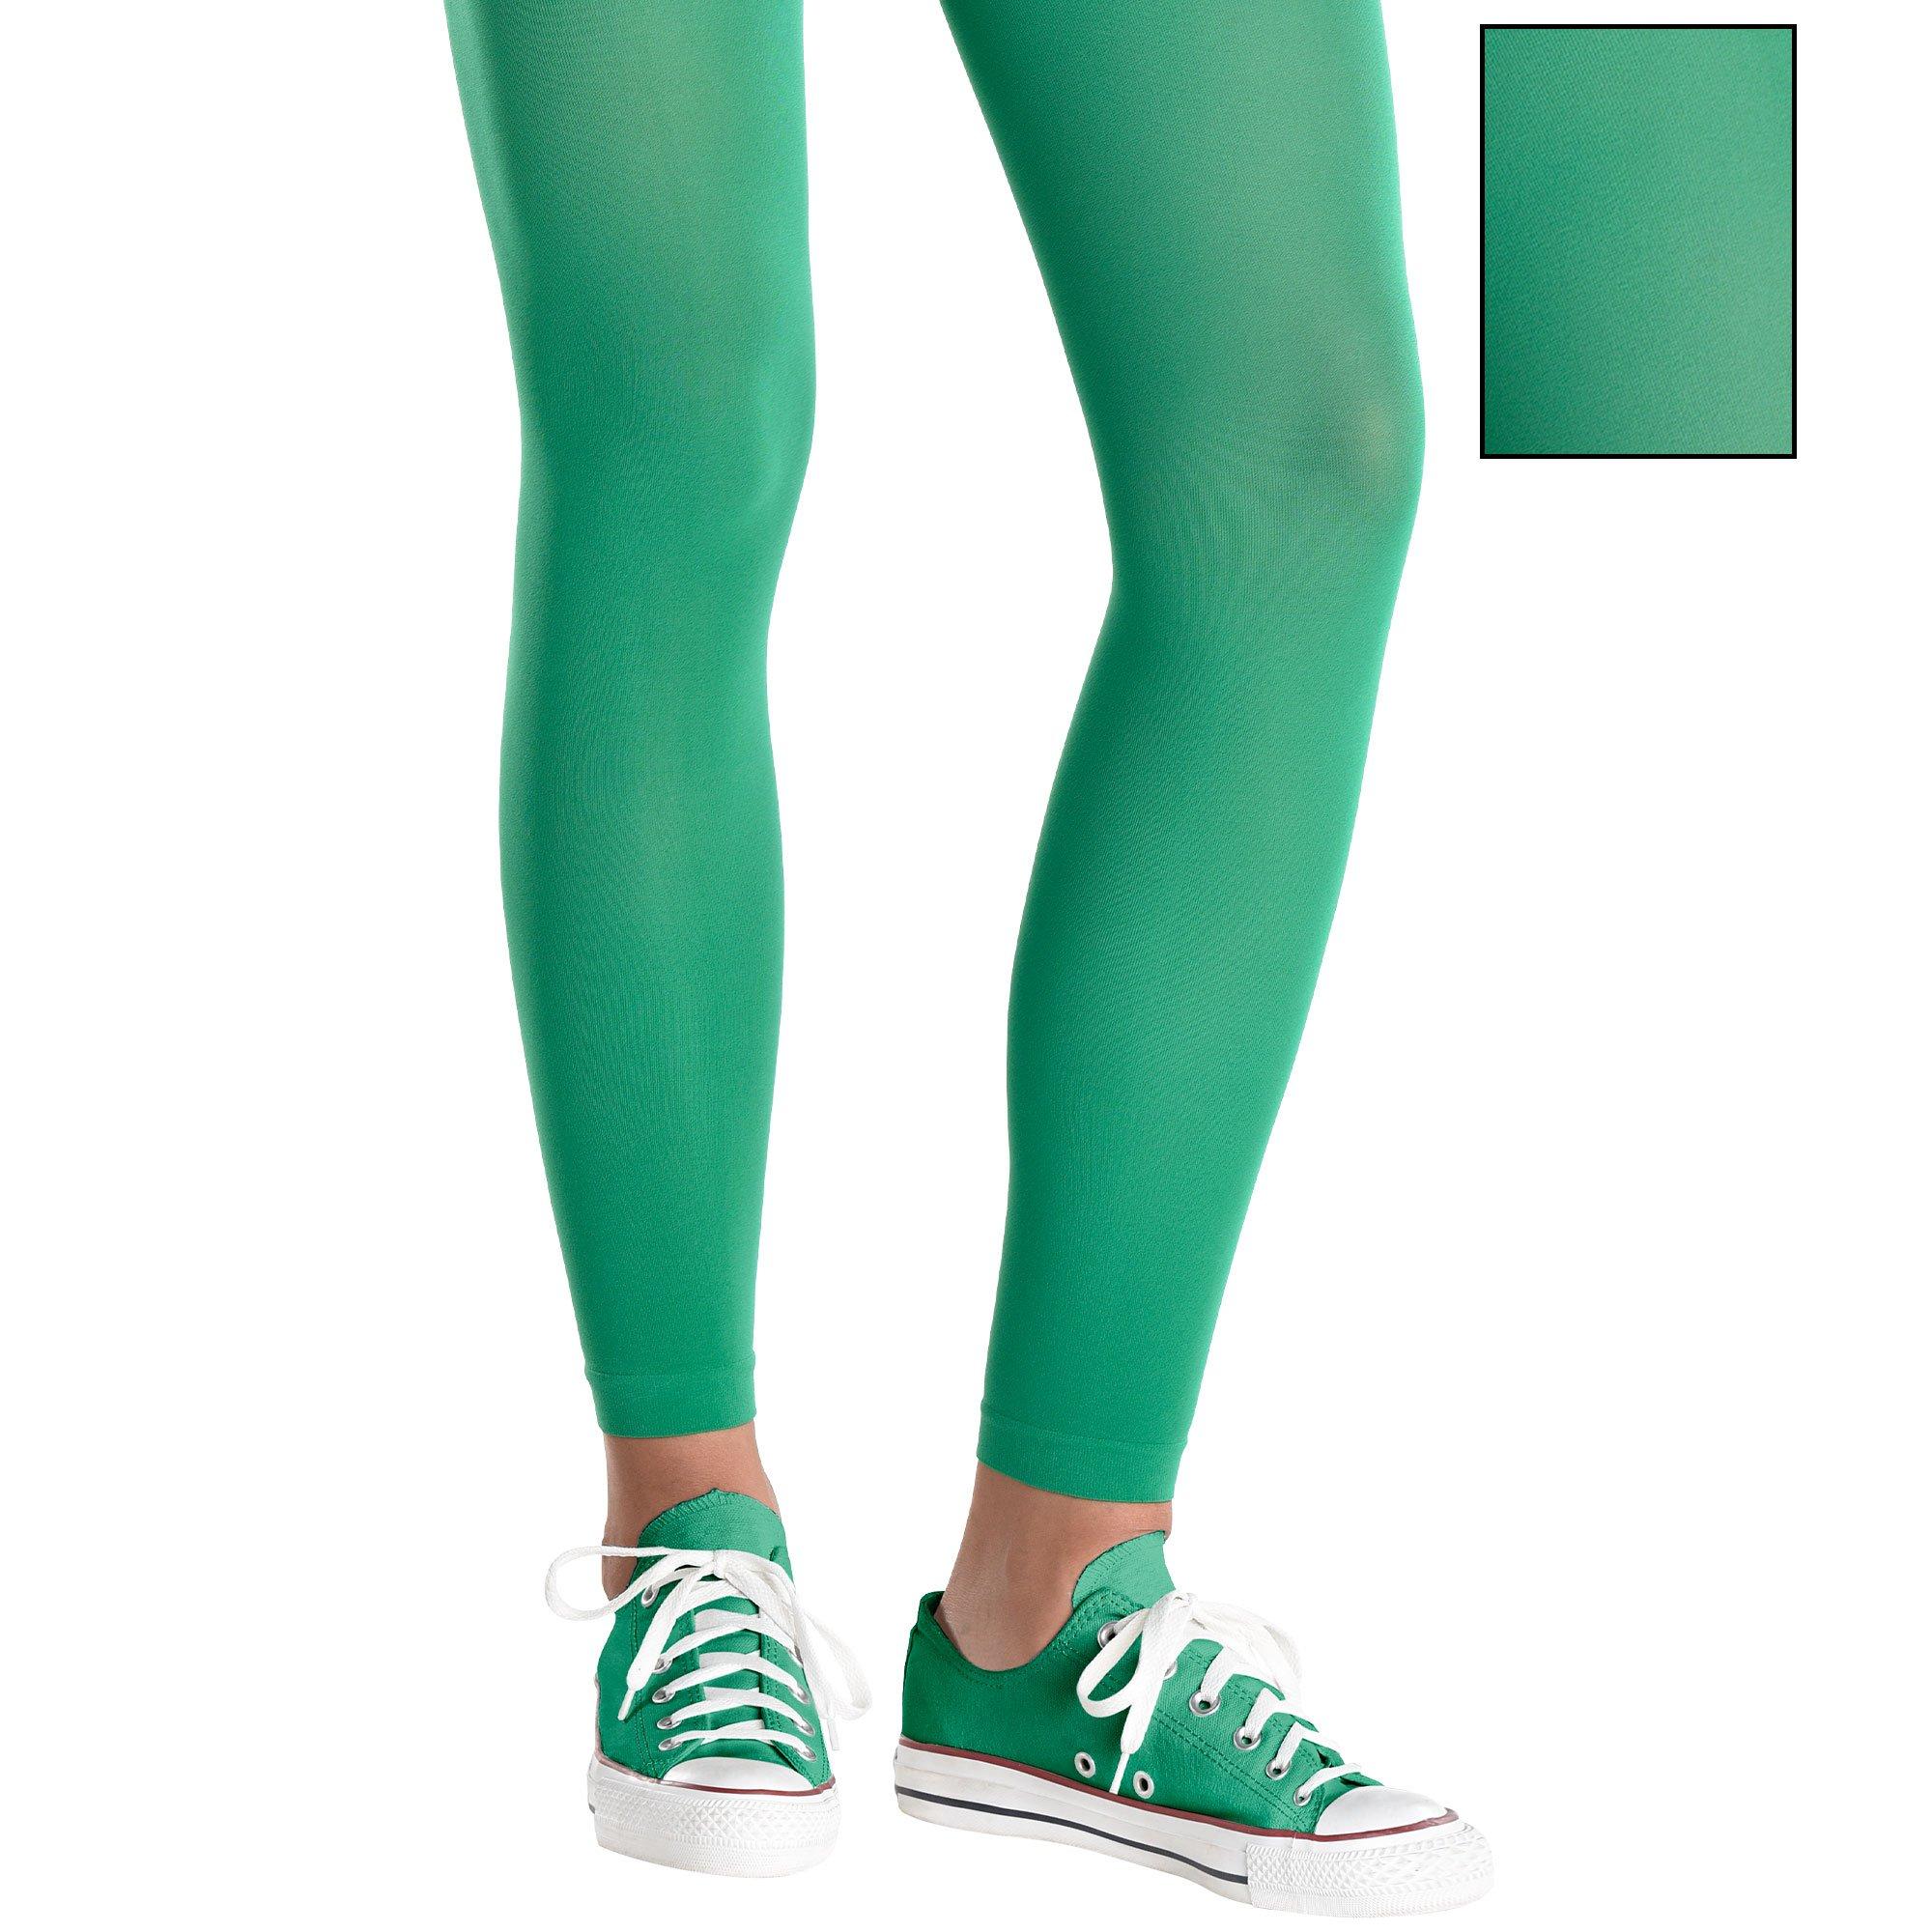 Womens Lime Green Tights Halloween Costume Accessory 